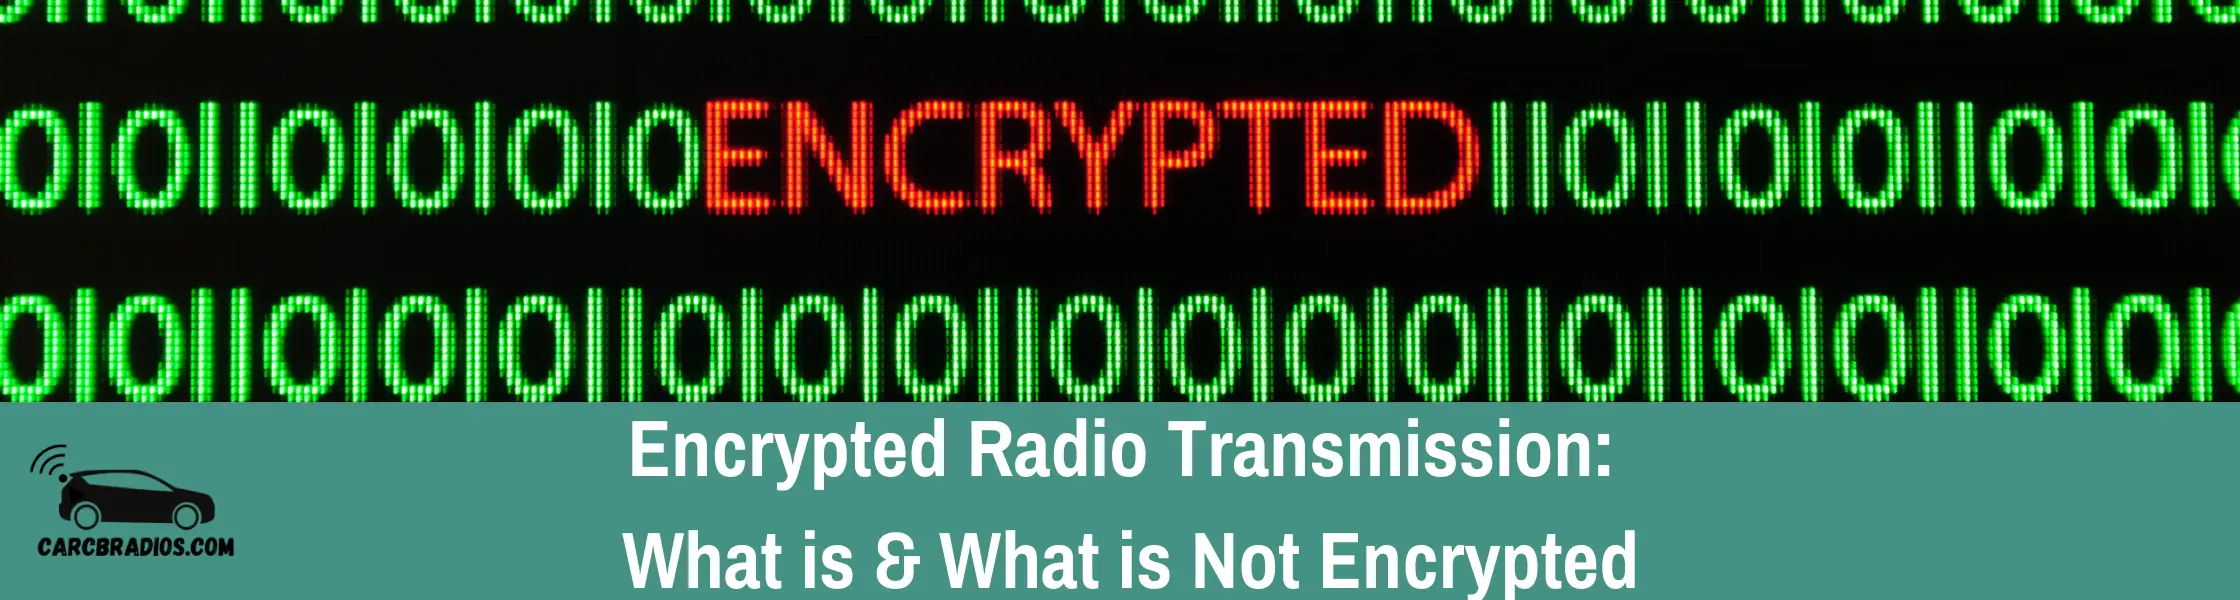 Encrypted Radio Transmission: Let's dive into explaining what is encrypted radio transmissions, radios that are encrypted and uses cases for when you want to ...